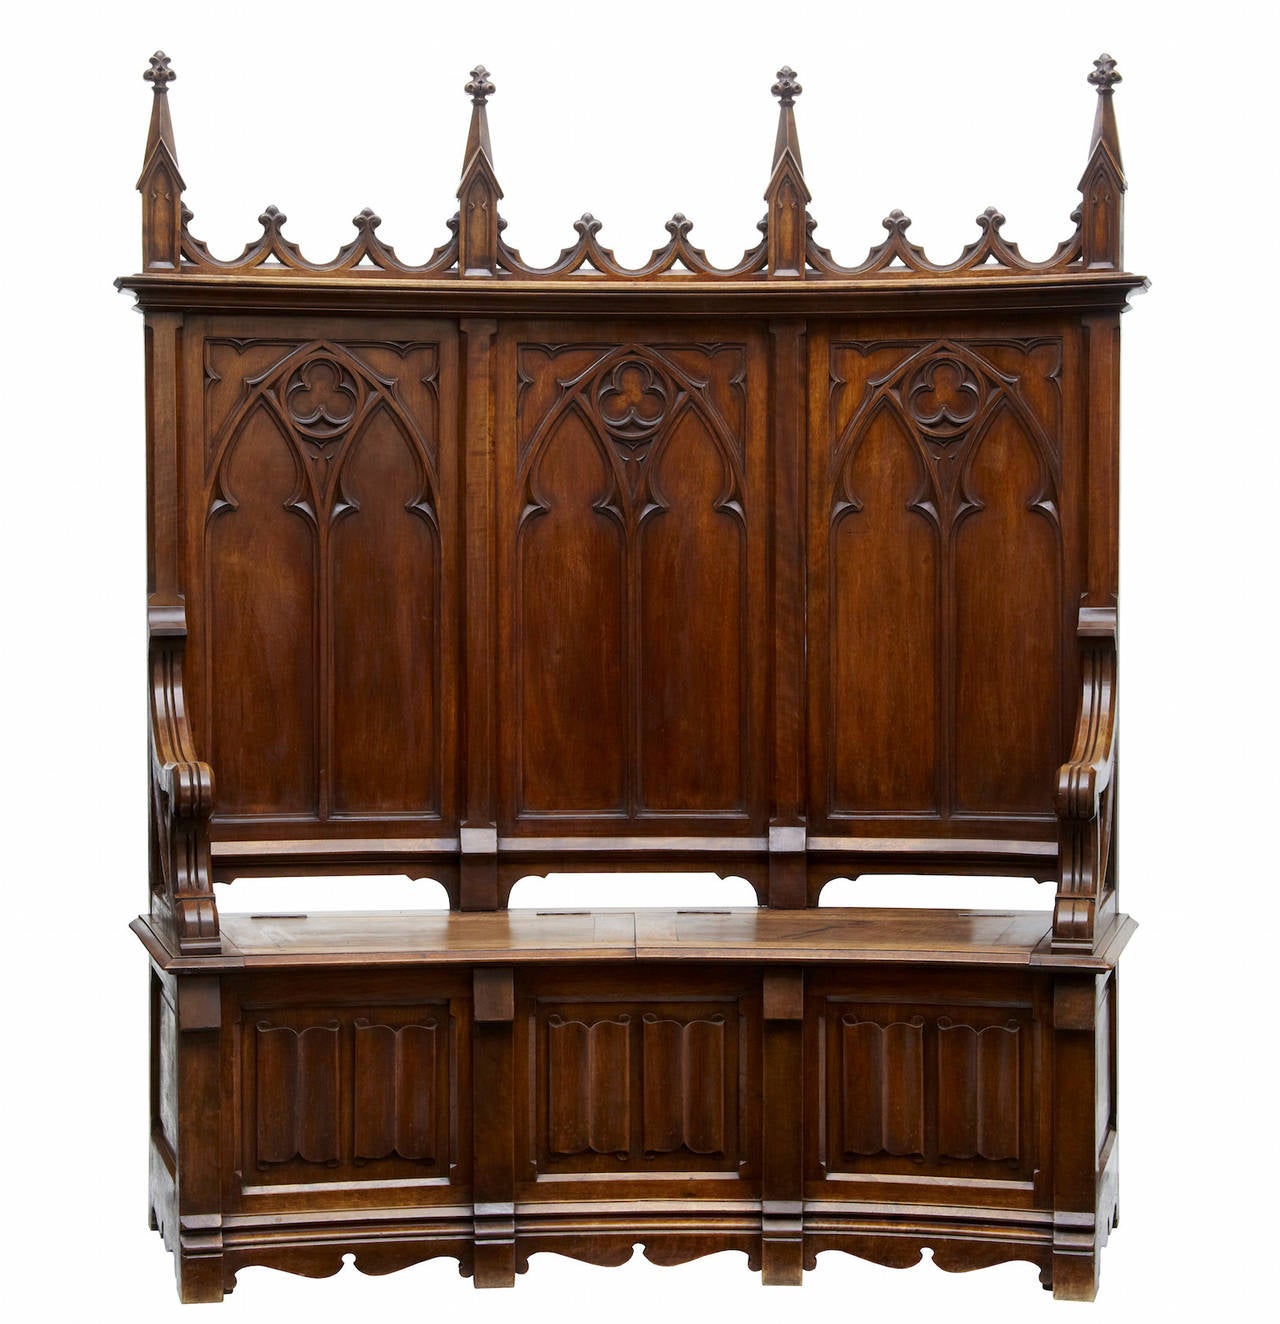 Super quality French walnut settle circa 1880. 

Featuring carved tracery elements to the back and arms. 

2 seats that lift up to expose storage space. 

Rare concave shape

HEIGHT: 67 1/4